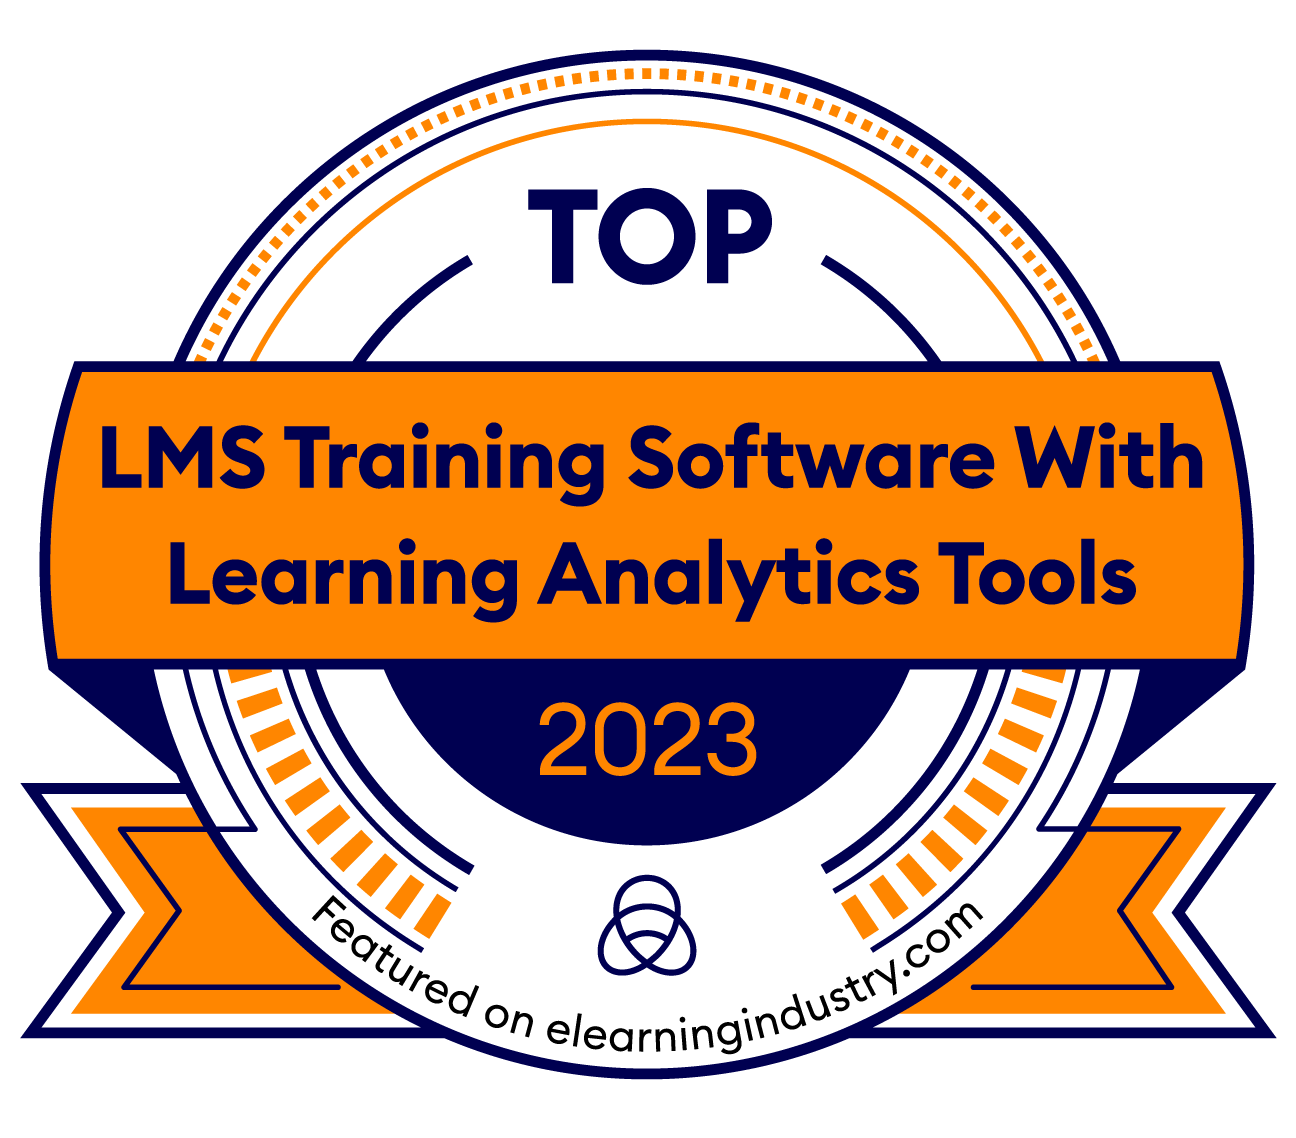 Brainier Named 2023 Top LMS with Learning Analytics Tools by eLearningIndustry.com